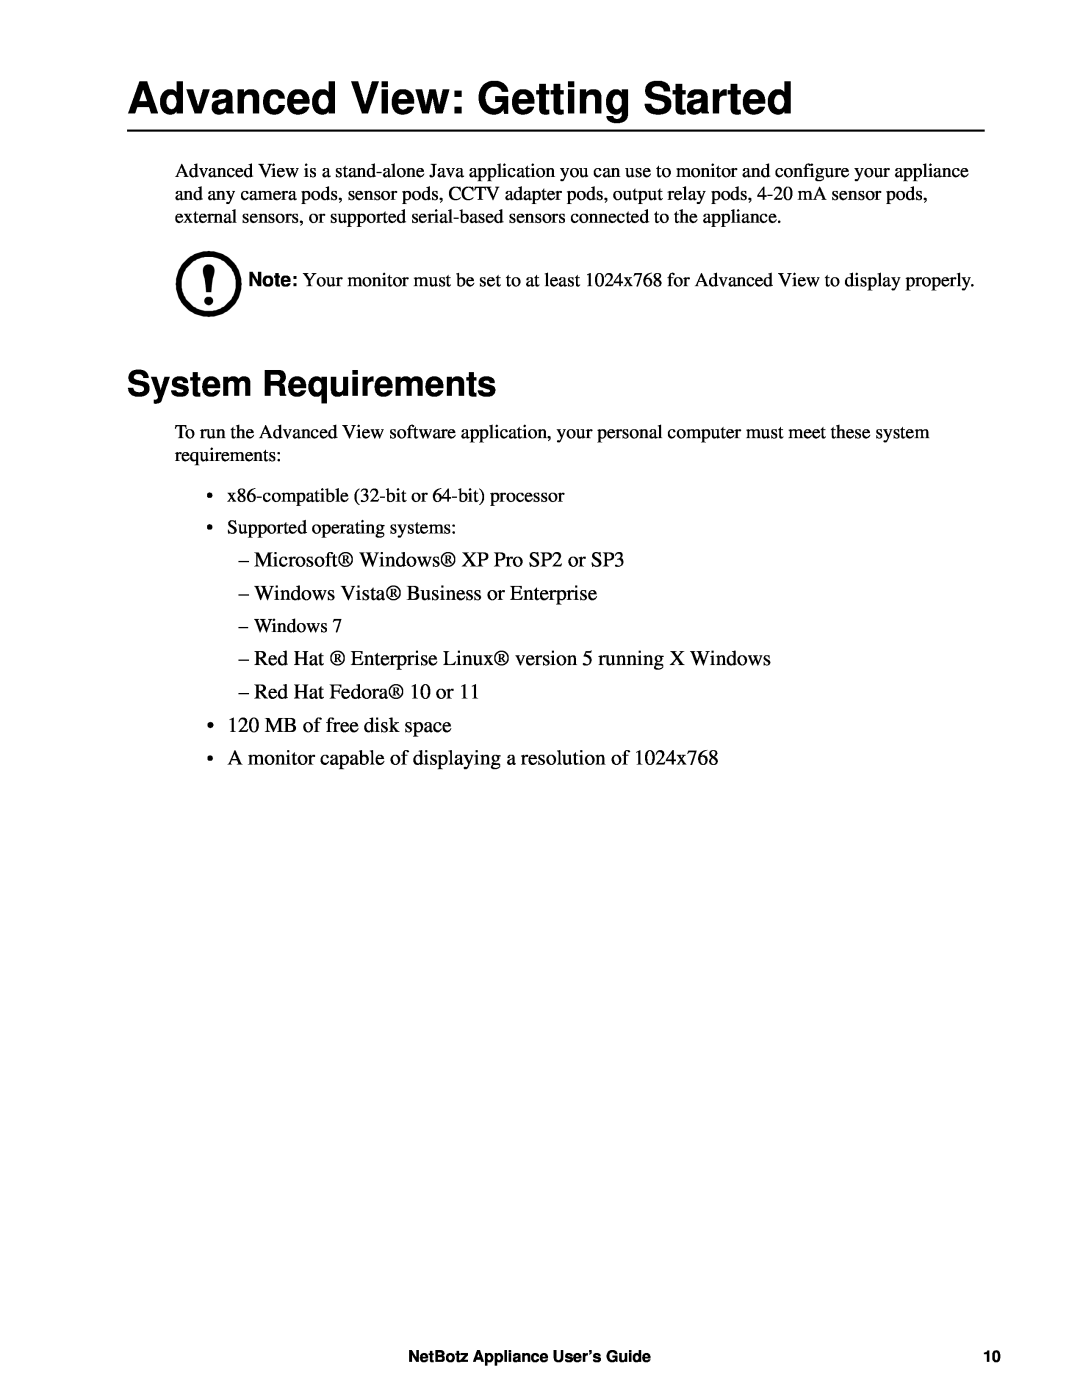 APC NBRK0570, NBRK0550, NBRK0450 Advanced View: Getting Started, System Requirements, Microsoft Windows XP Pro SP2 or SP3 